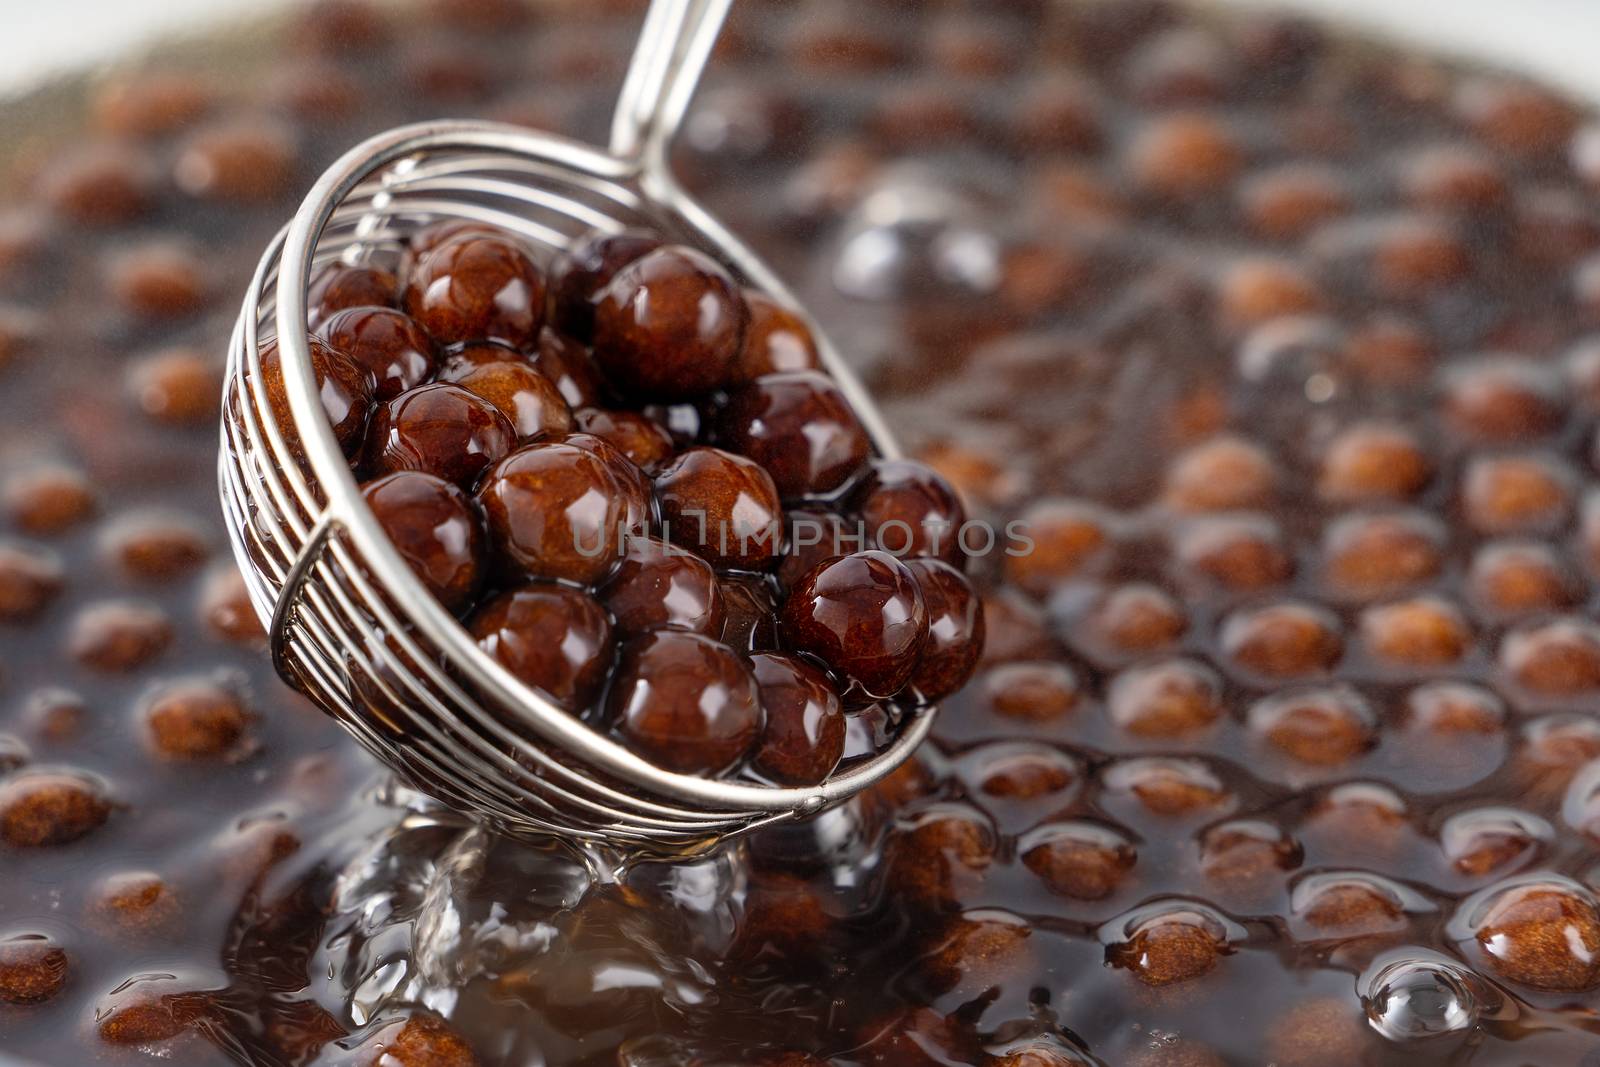 Cooking, boiling brown sugar flavor tapioca pearl balls, ingredient of bubble tea, preparing food and drink, close up, recipe cookbook steps design concept.